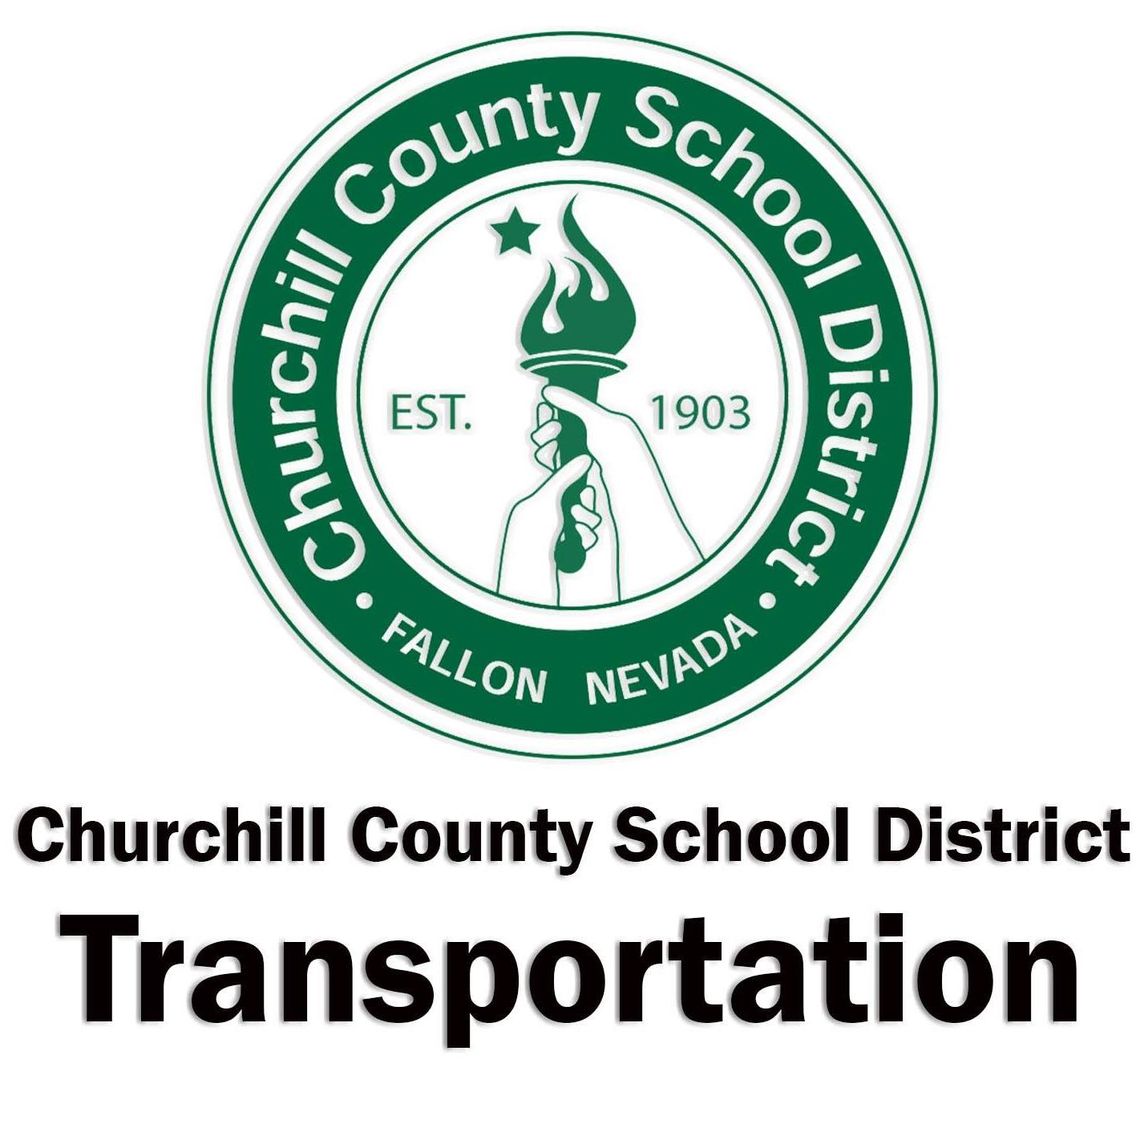 CCSD Bus Involved in Minor Accident Tuesday Morning